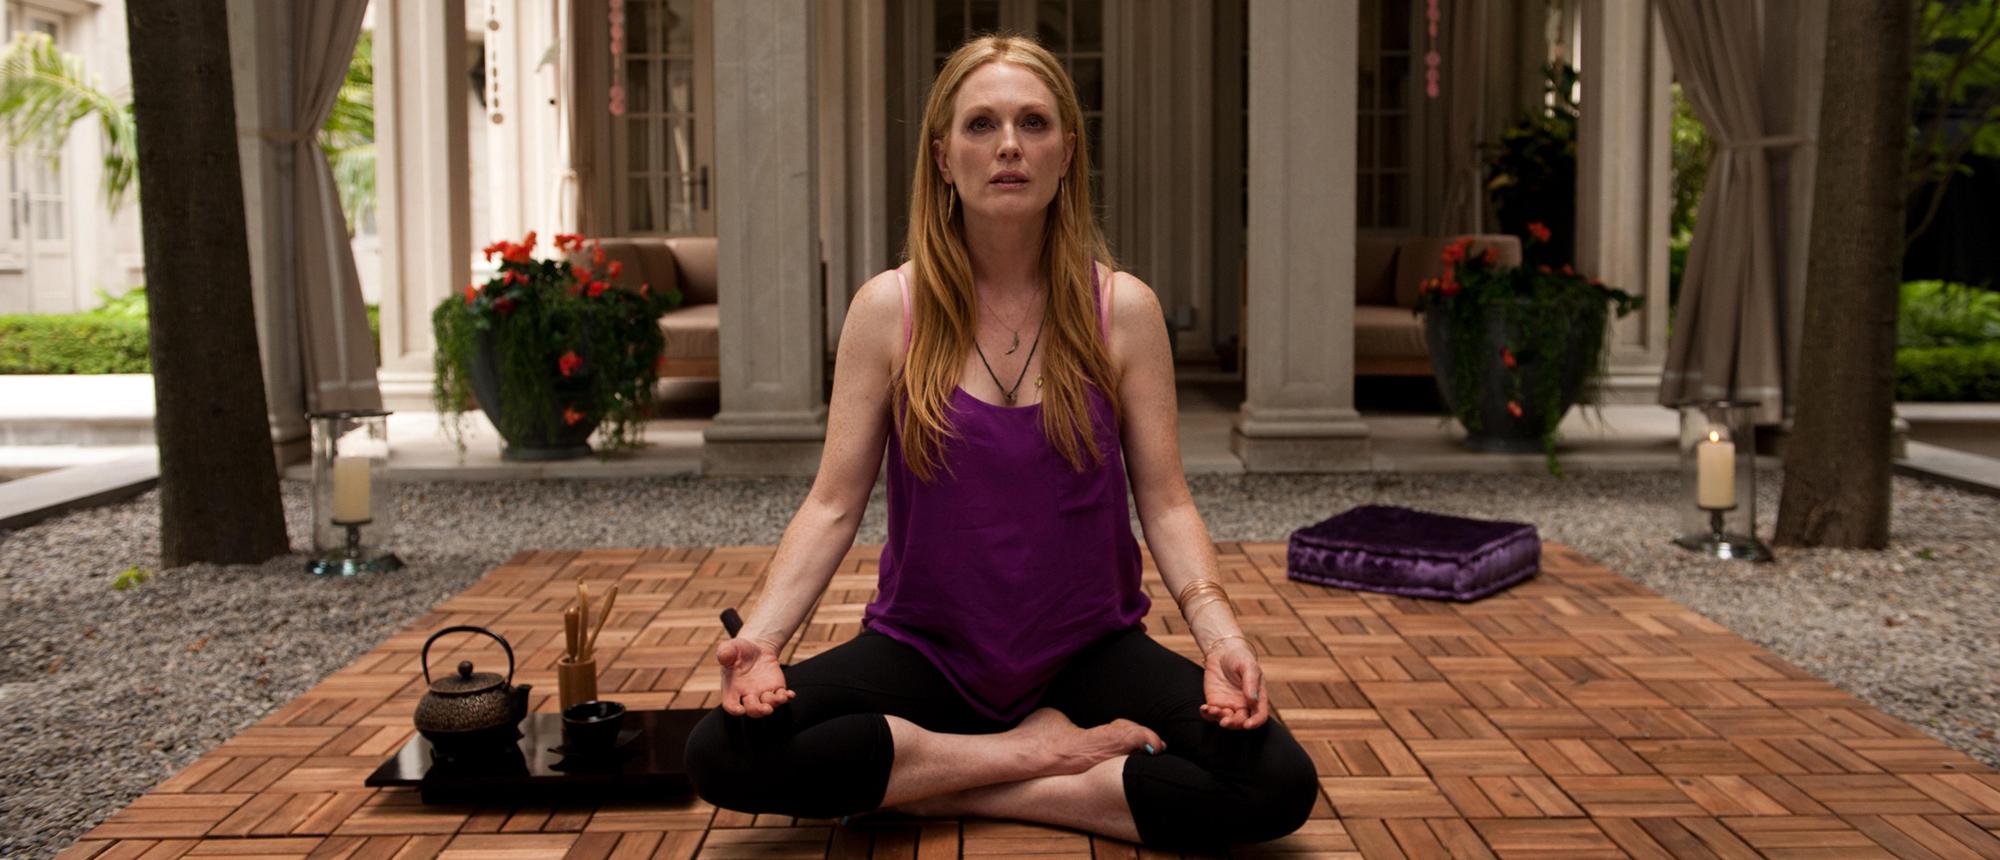 Review phim Maps to the stars